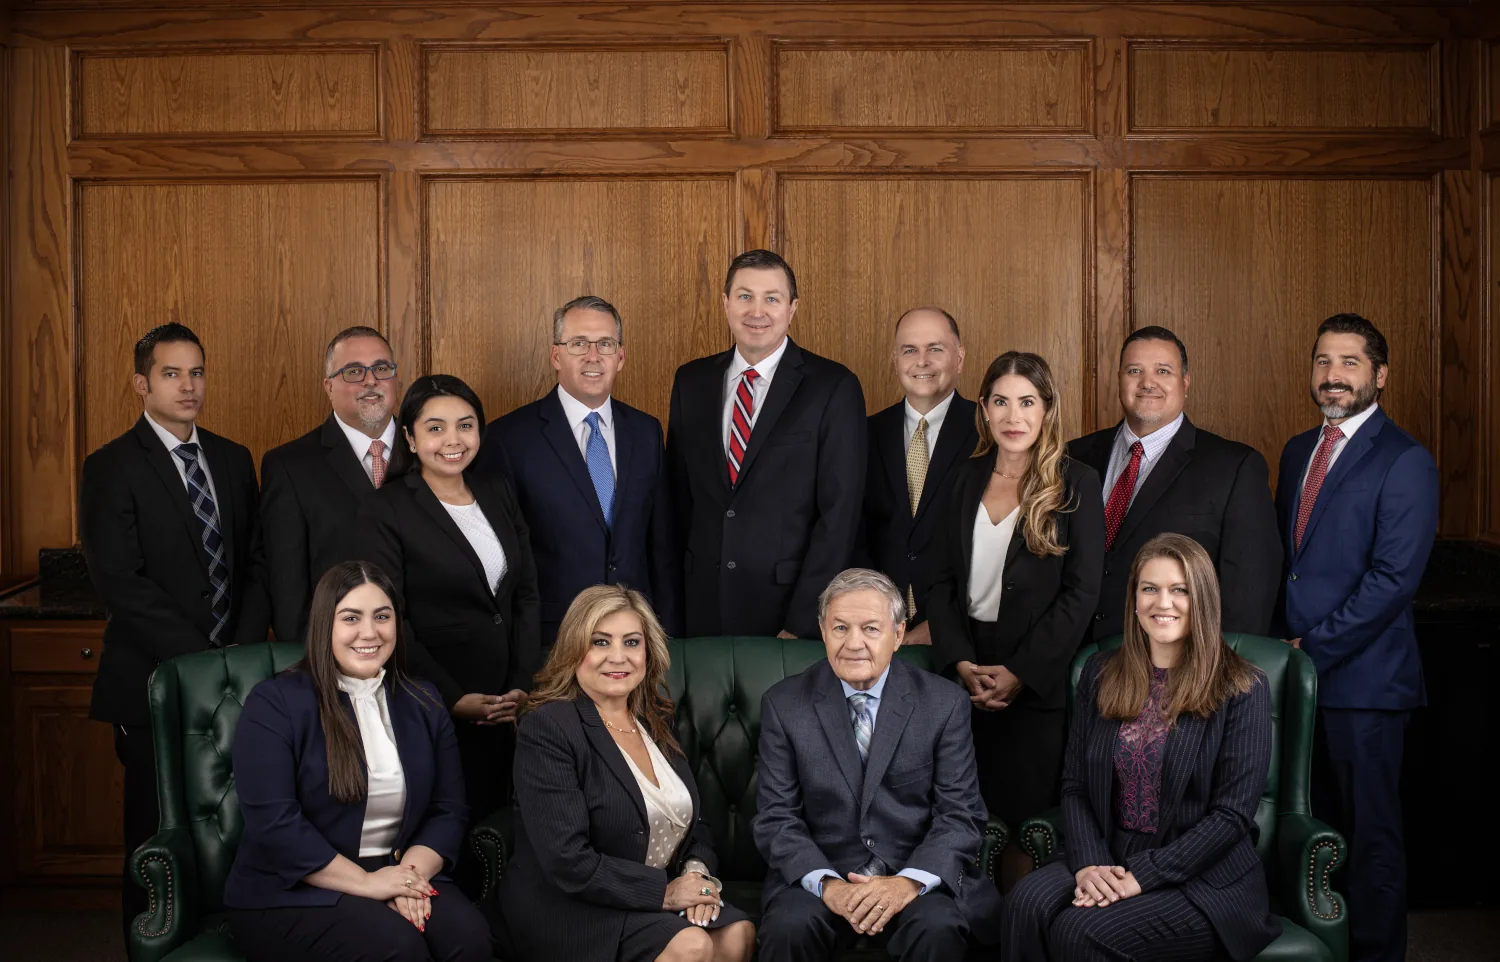 The Attorneys of JGKL